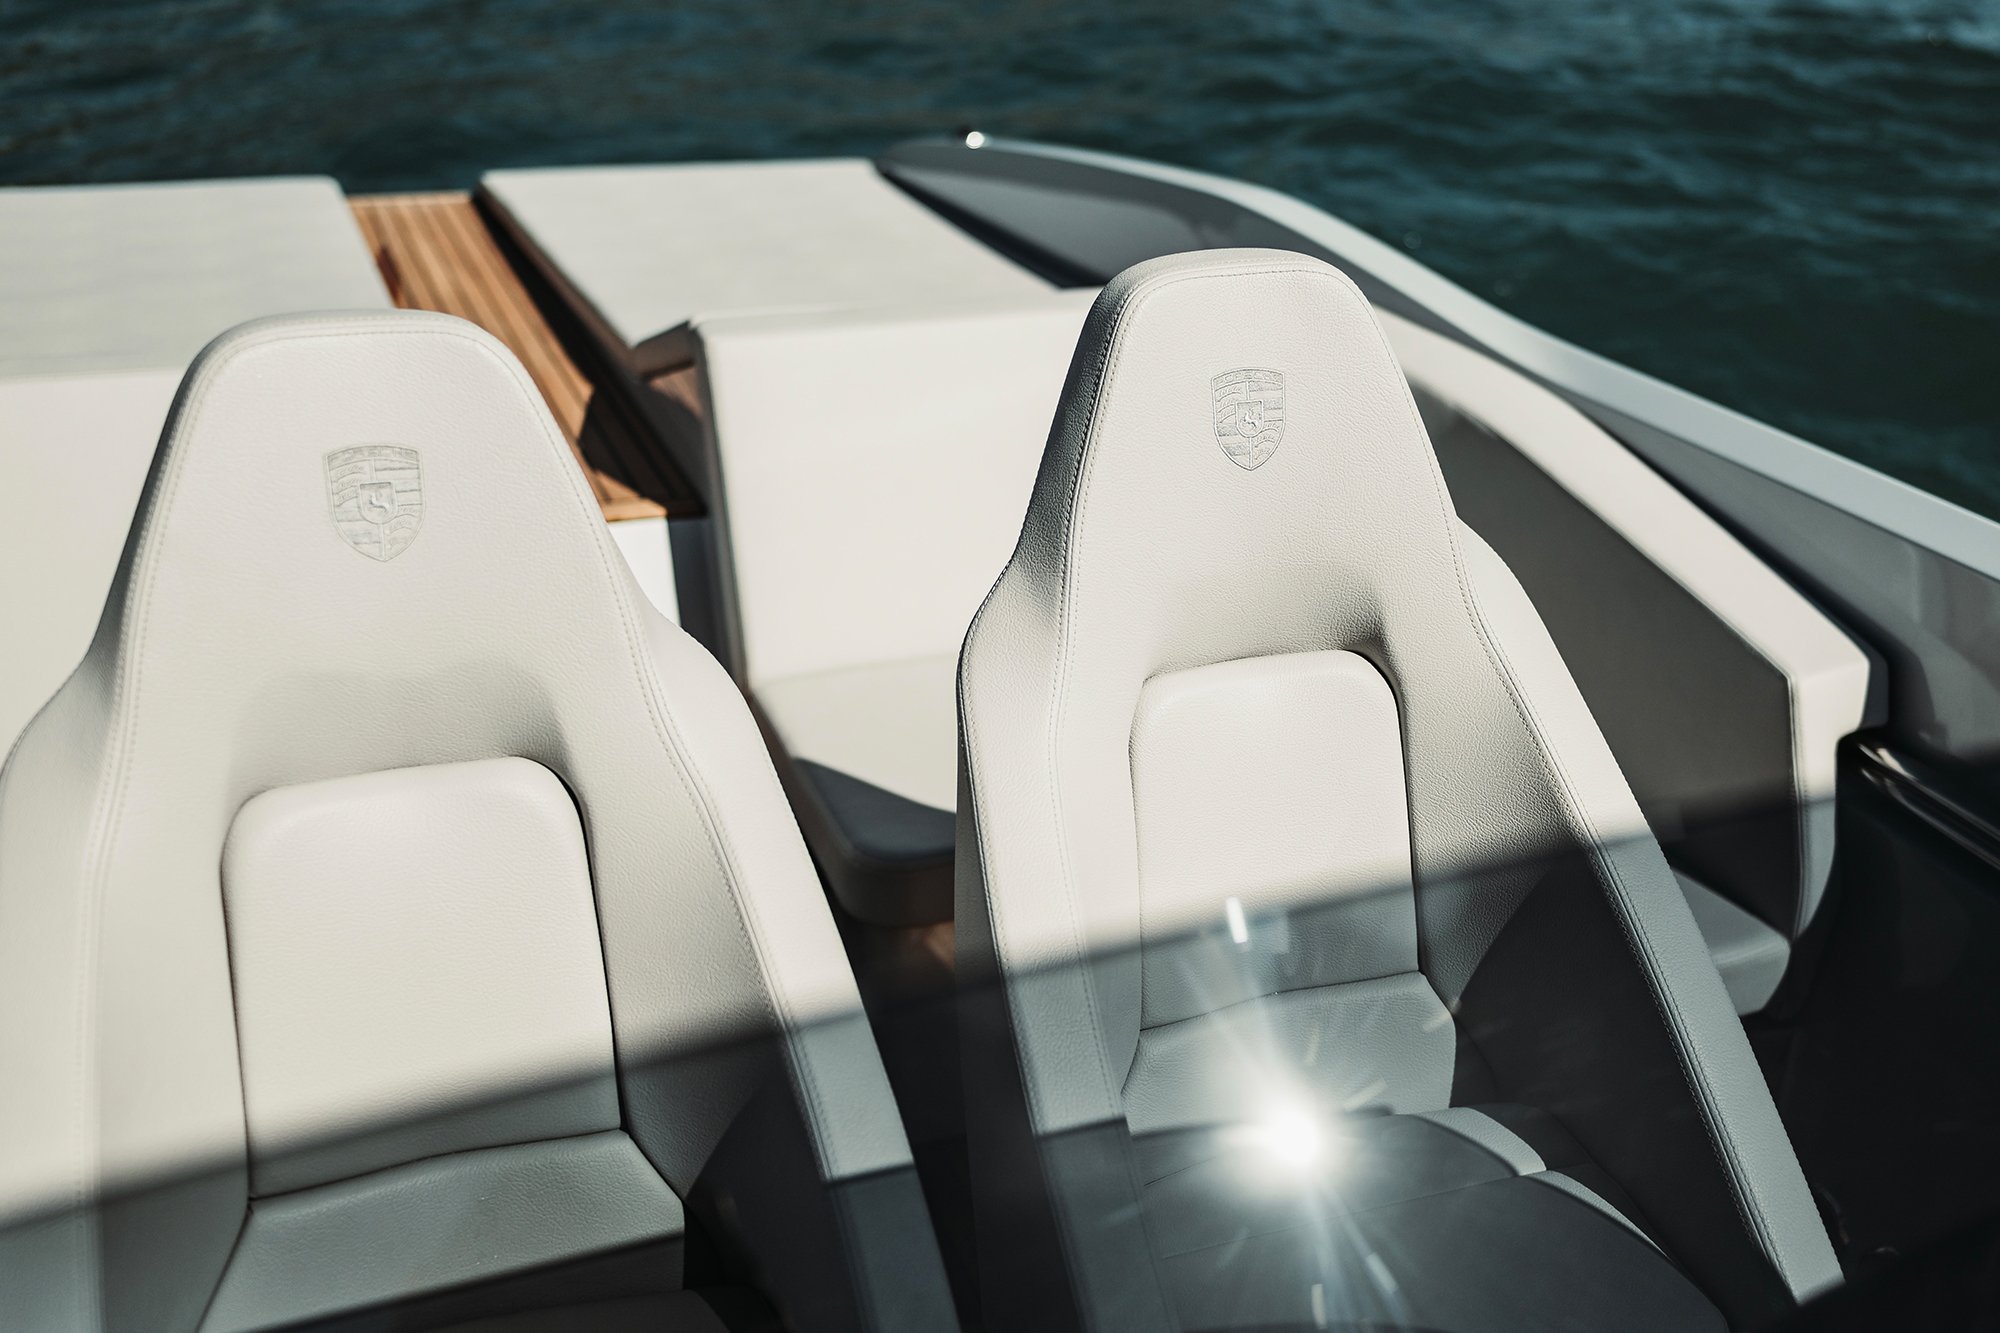 Seating design of the The design of the Porsche Frauscher 850 Fantom Air electric boat